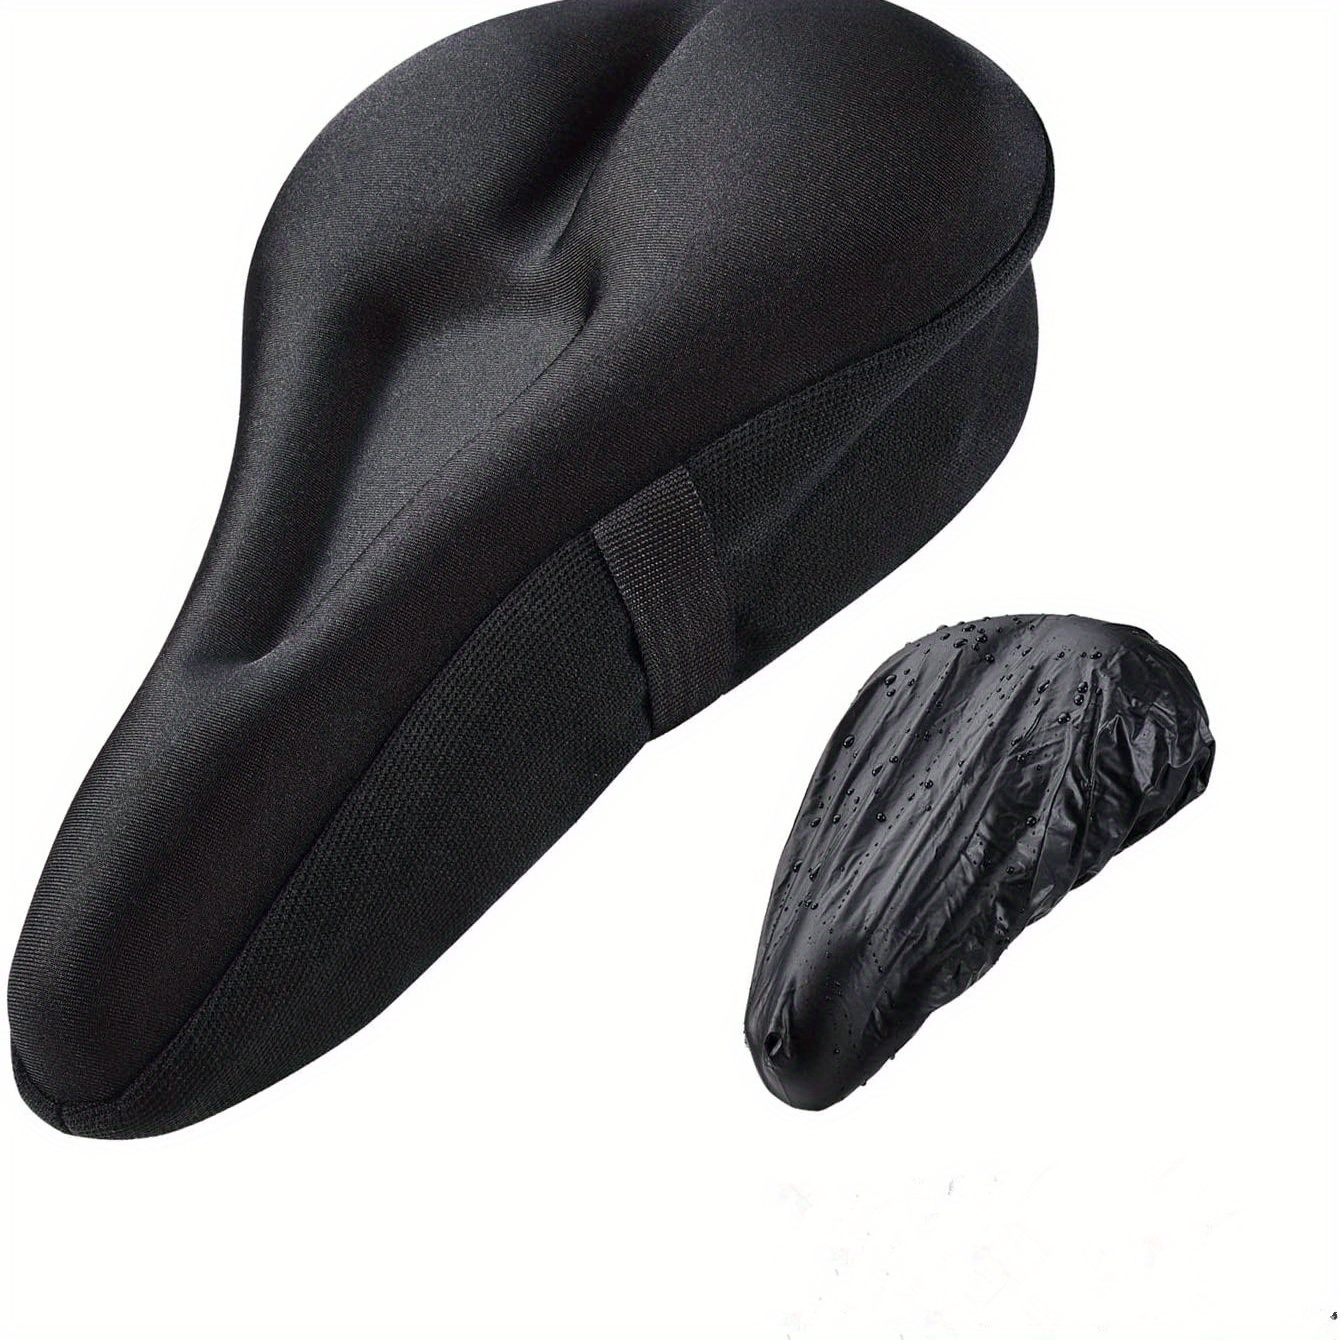  Zacro Bike Seat Cushion - Padded Gel Bike Seat Cover for Men &  Women Comfort, Extra Soft Bicycle Saddle fit with Peloton, Spin Stationary  Exercise : Sports & Outdoors